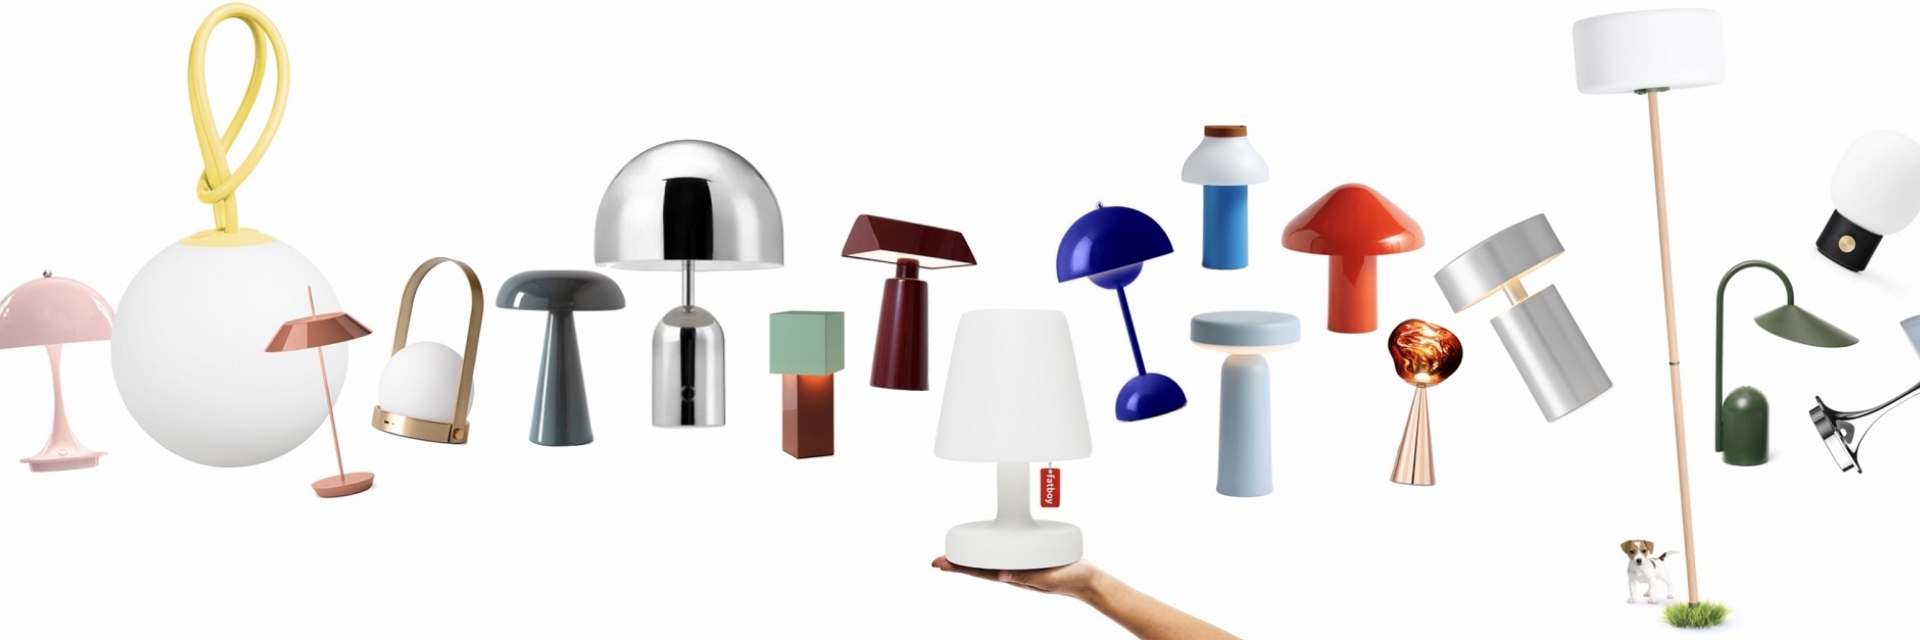 Range of Portable Lamps available at Designcraft